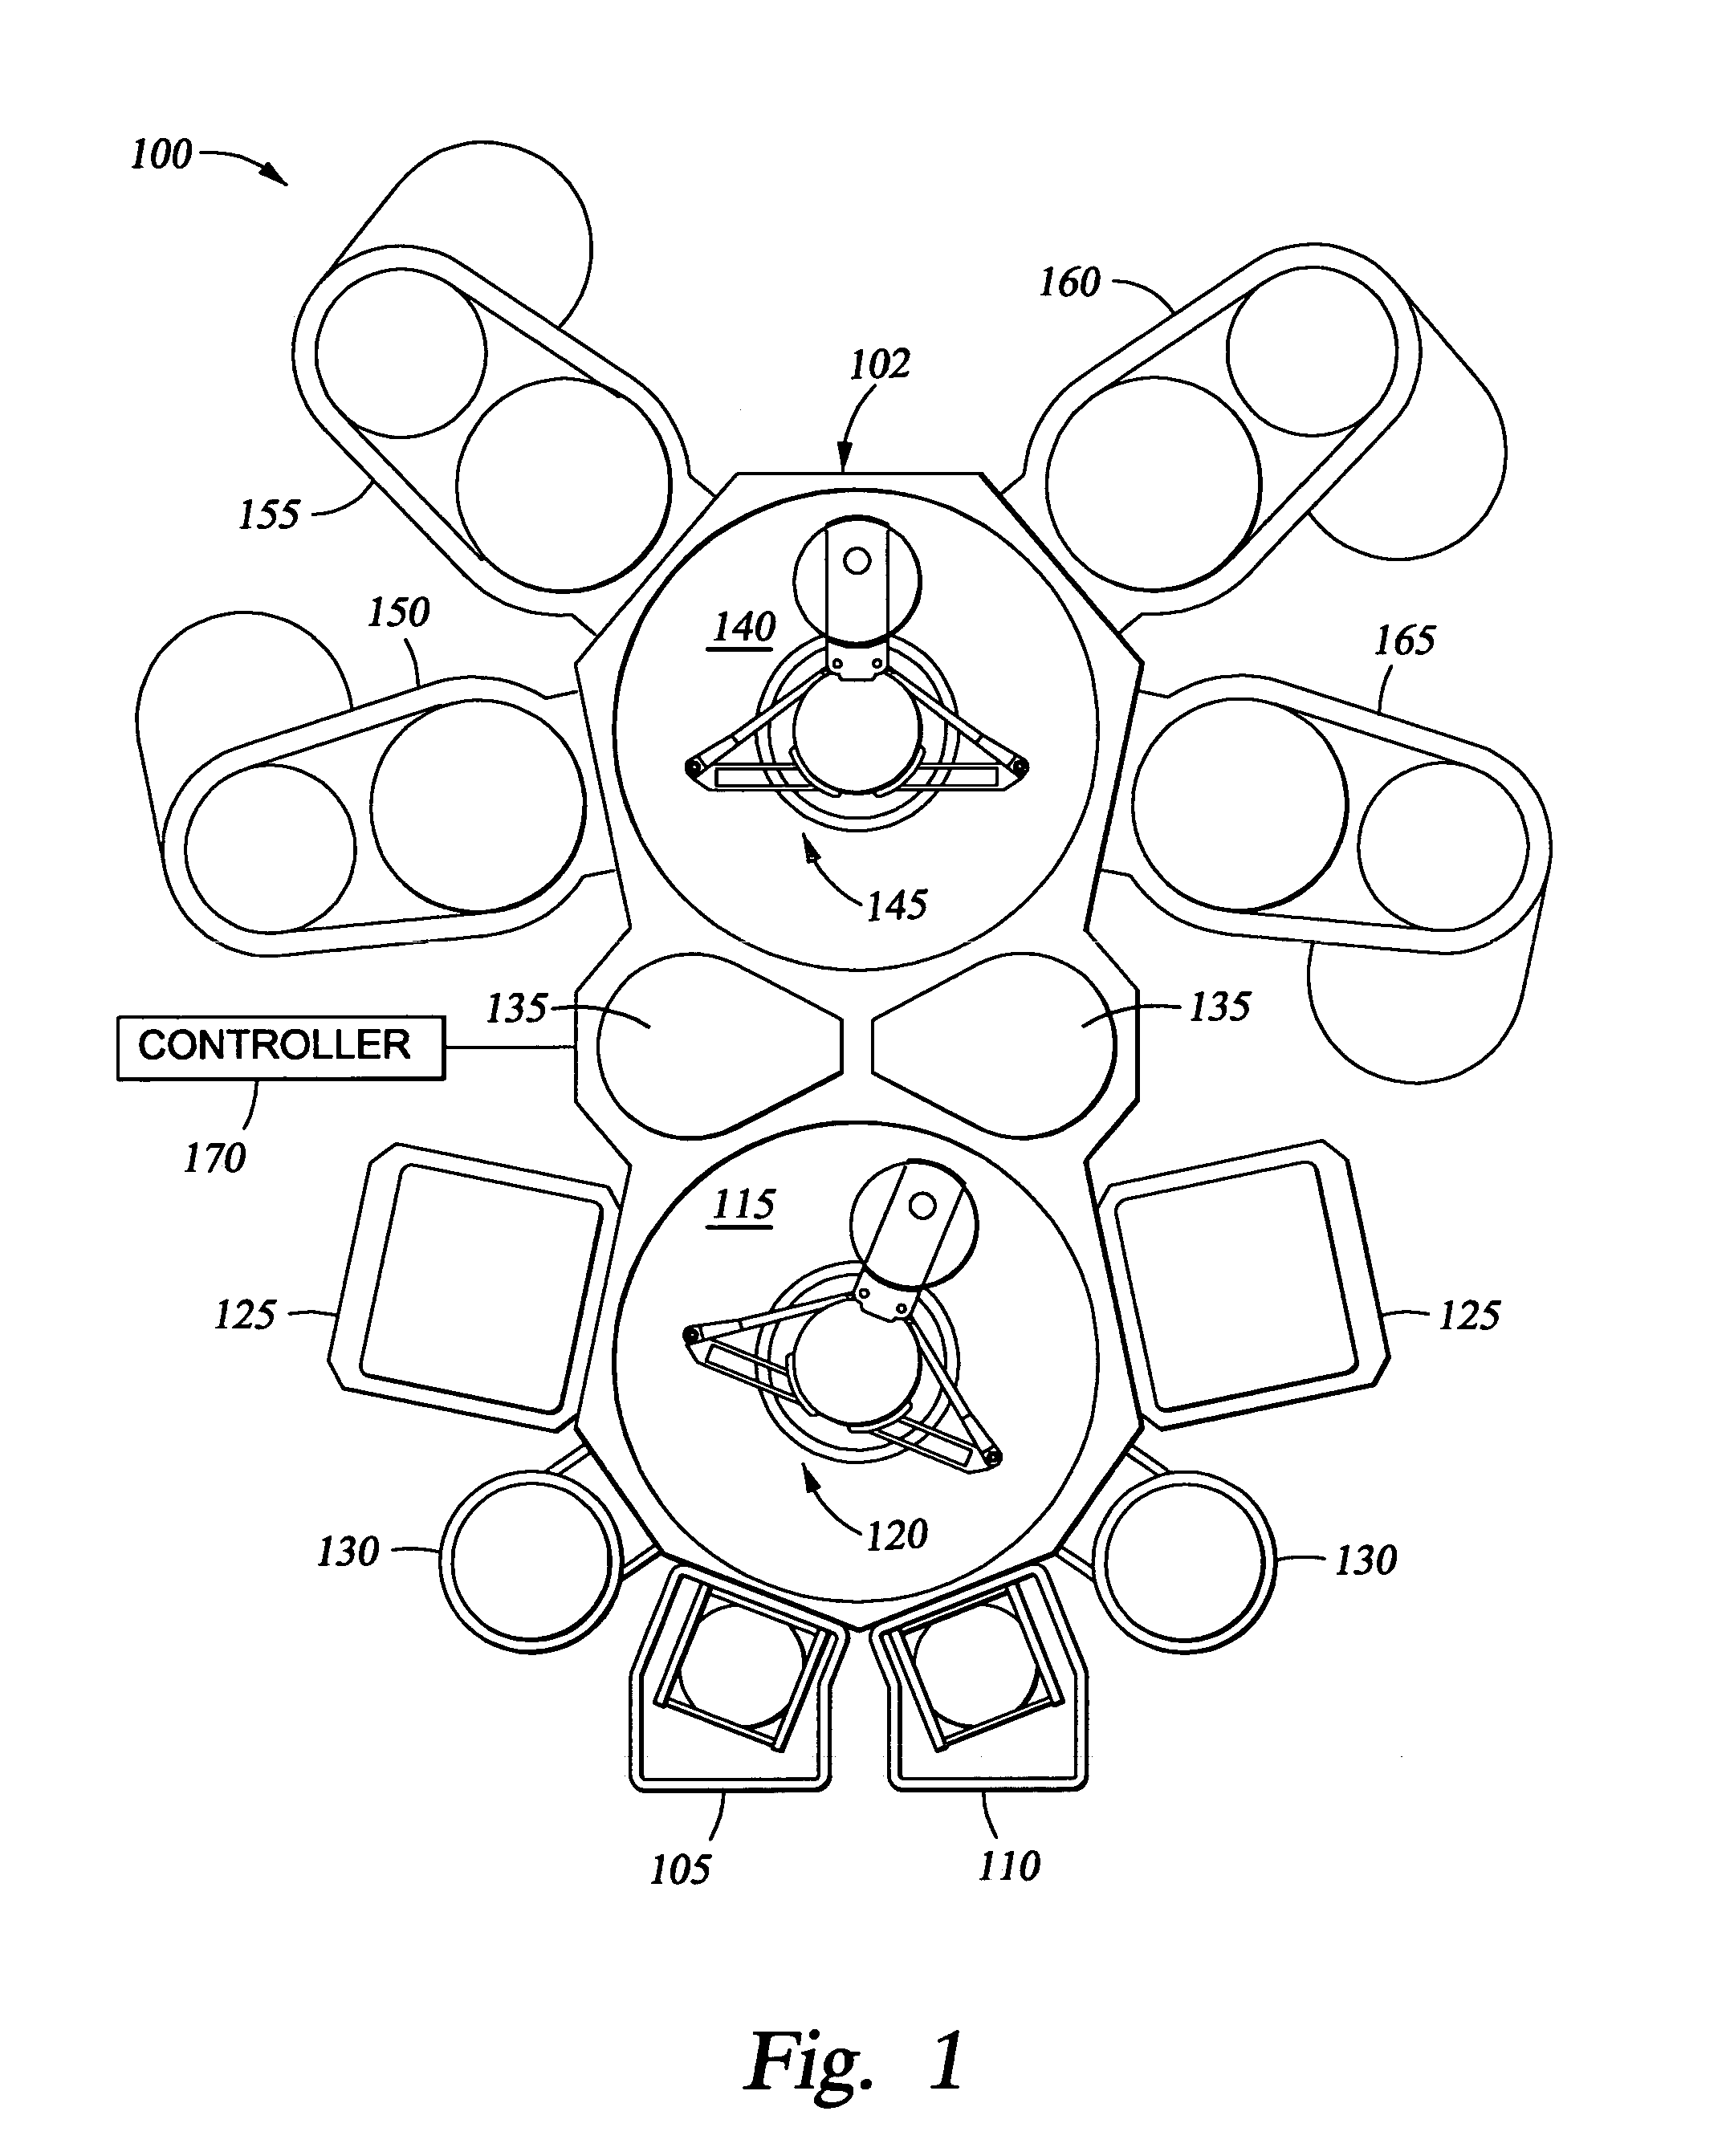 Multi-purpose processing chamber with removable chamber liner